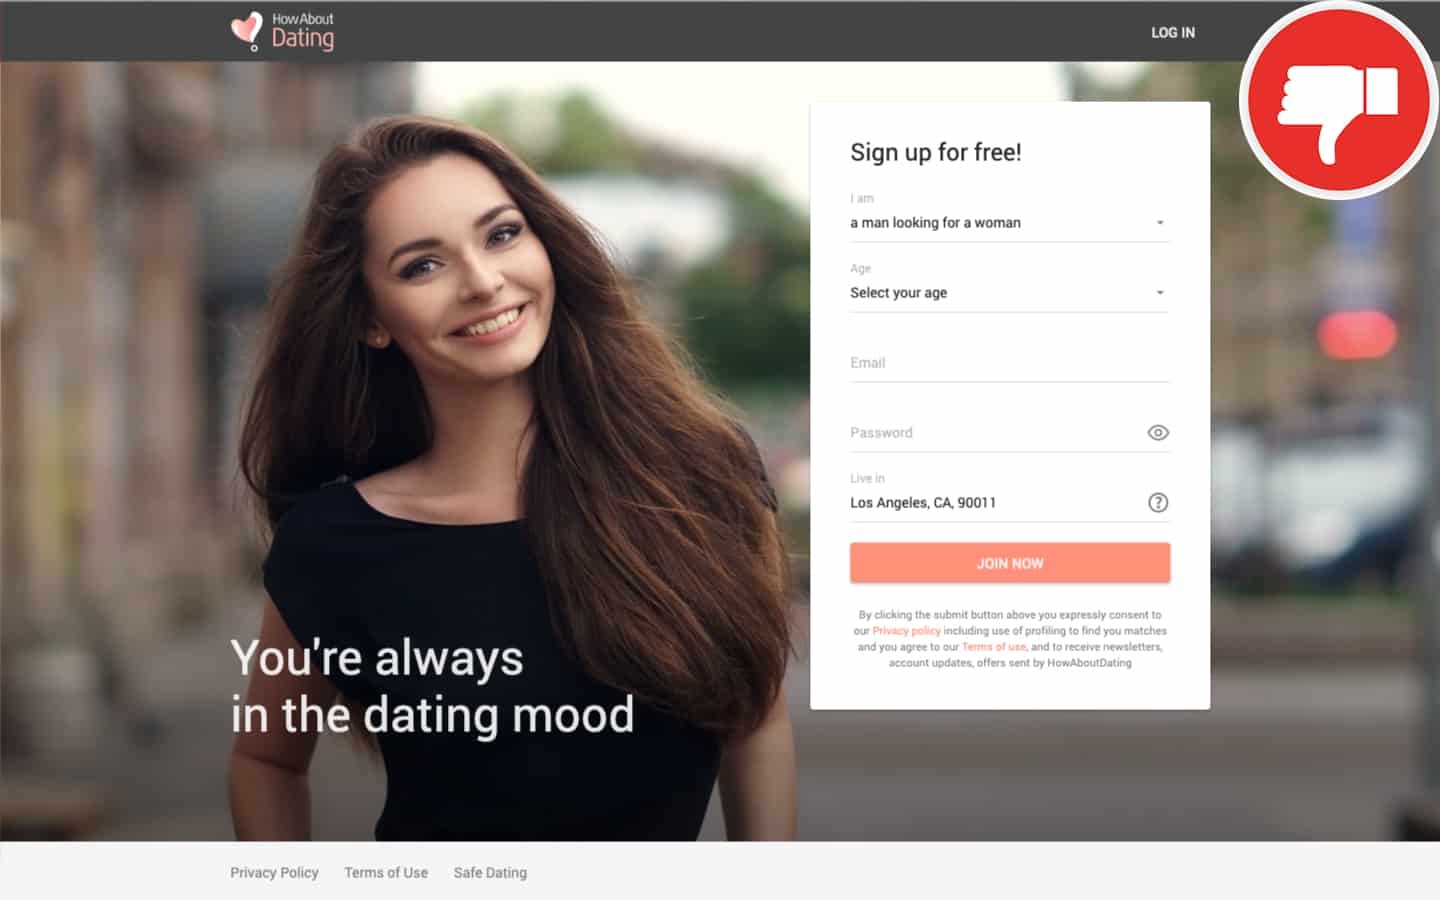 HowAboutDating.com review Scam